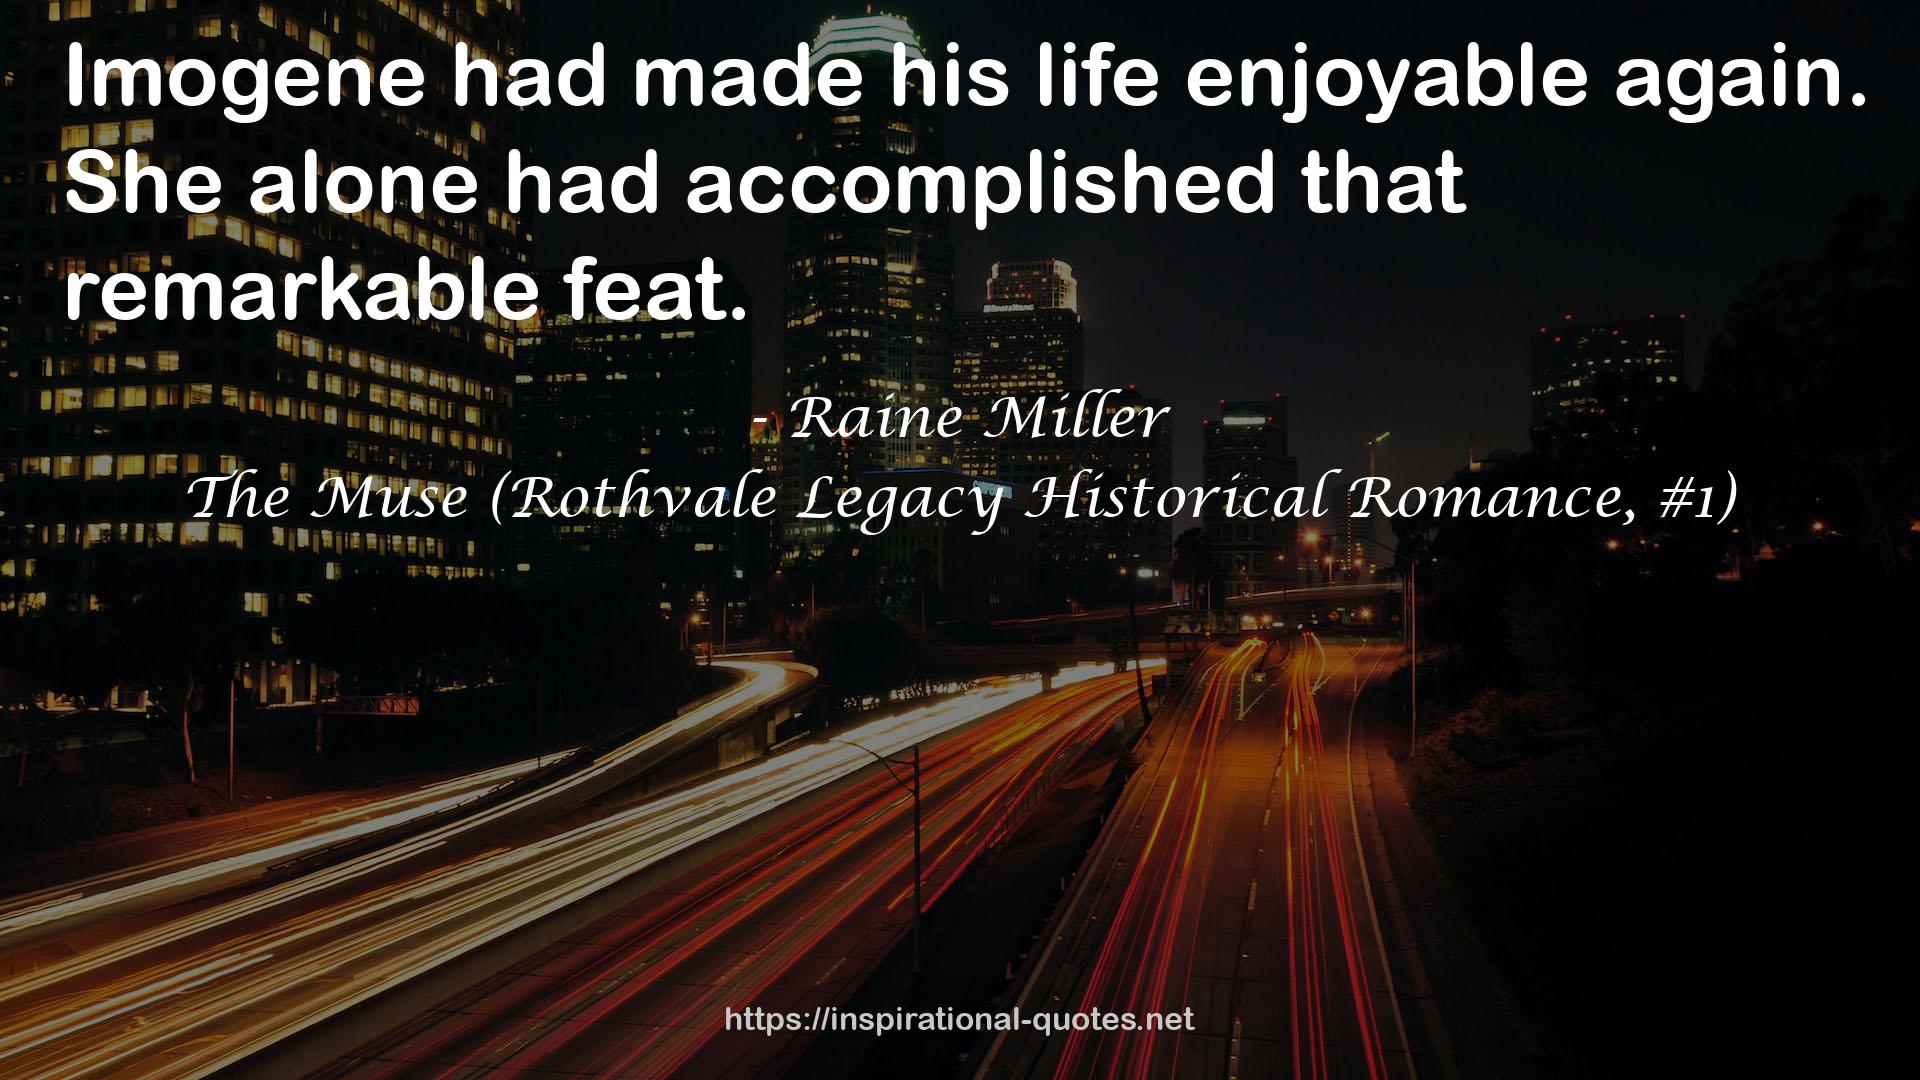 The Muse (Rothvale Legacy Historical Romance, #1) QUOTES